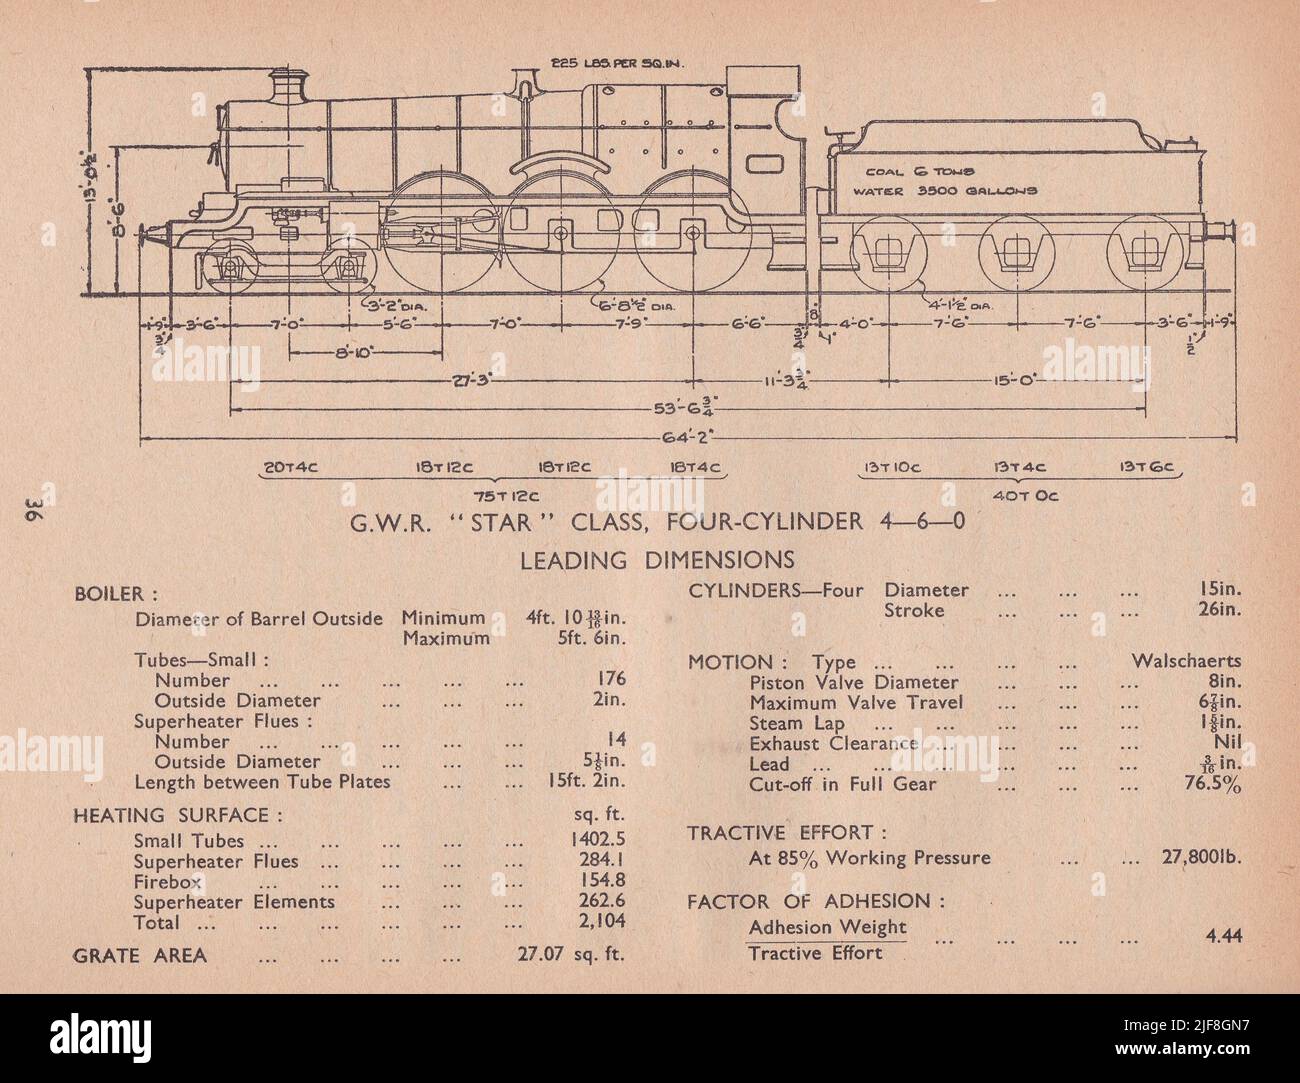 Vintage diagram of G.W.R Star Class, Four Cylinder 4-6-0 Leading Dimensions. Stock Photo